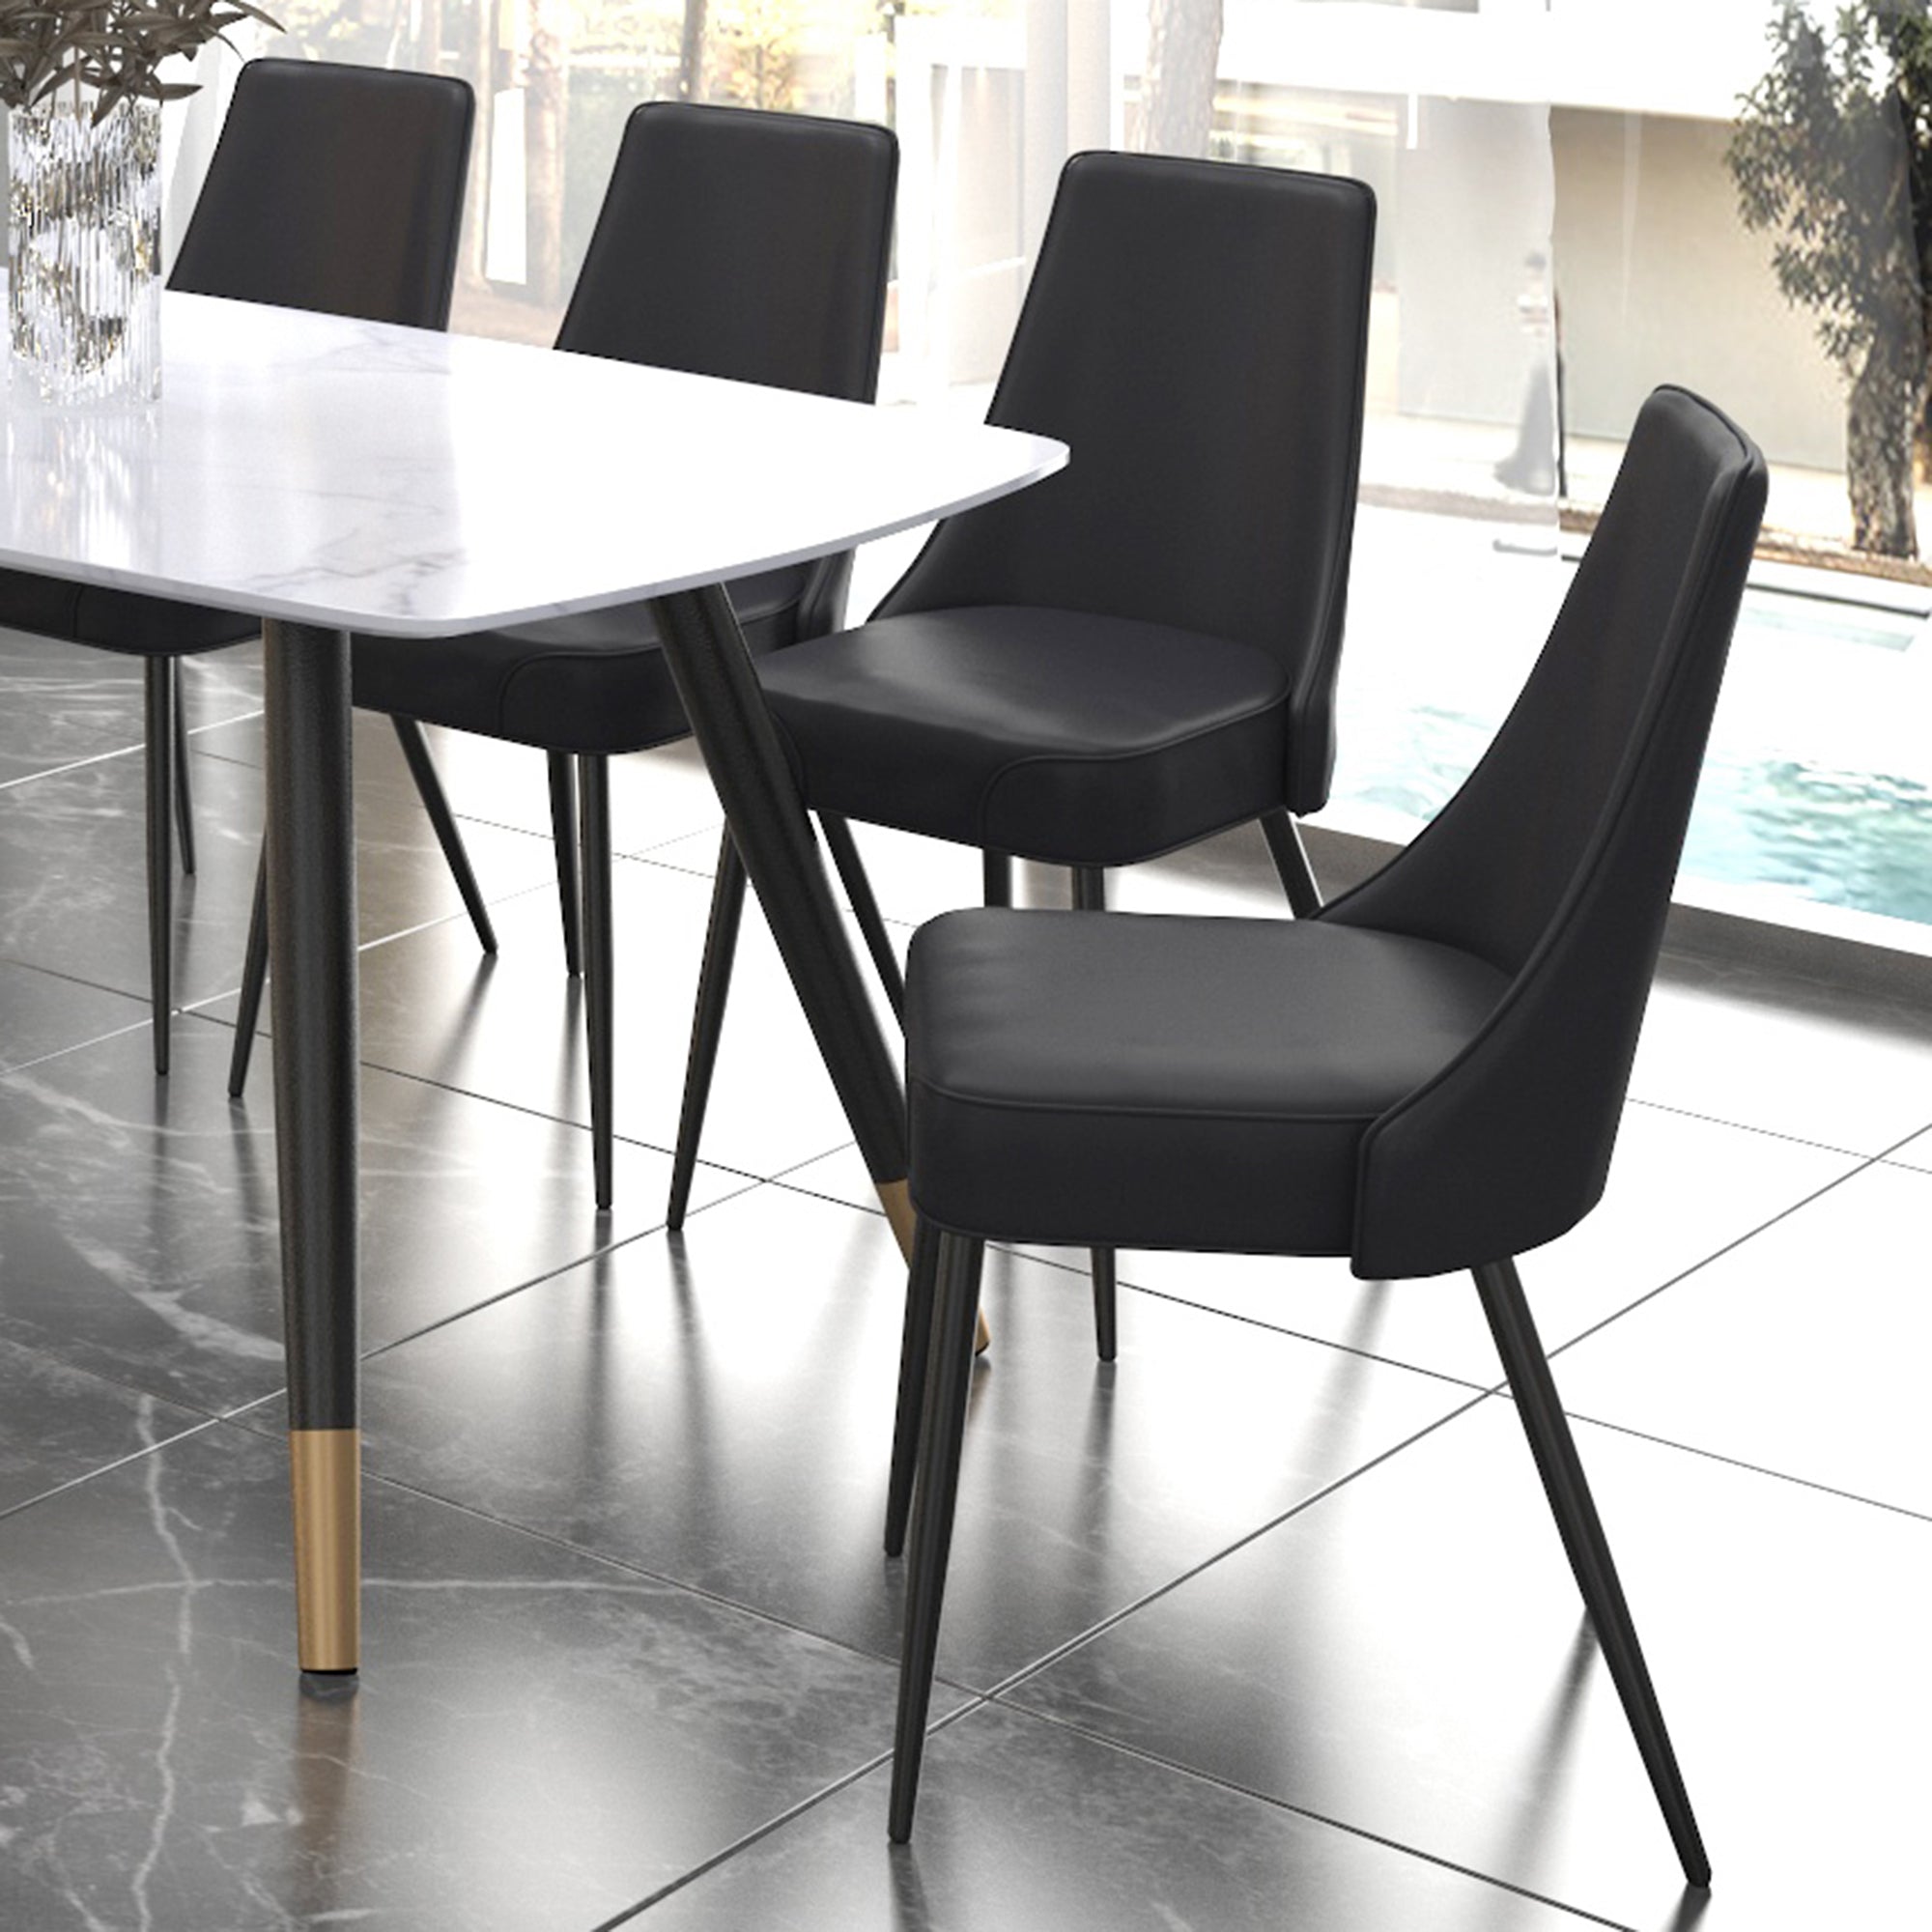 Kinyoun Faux Leather/Metal Dining Chair, Set of 2 - Black/Black